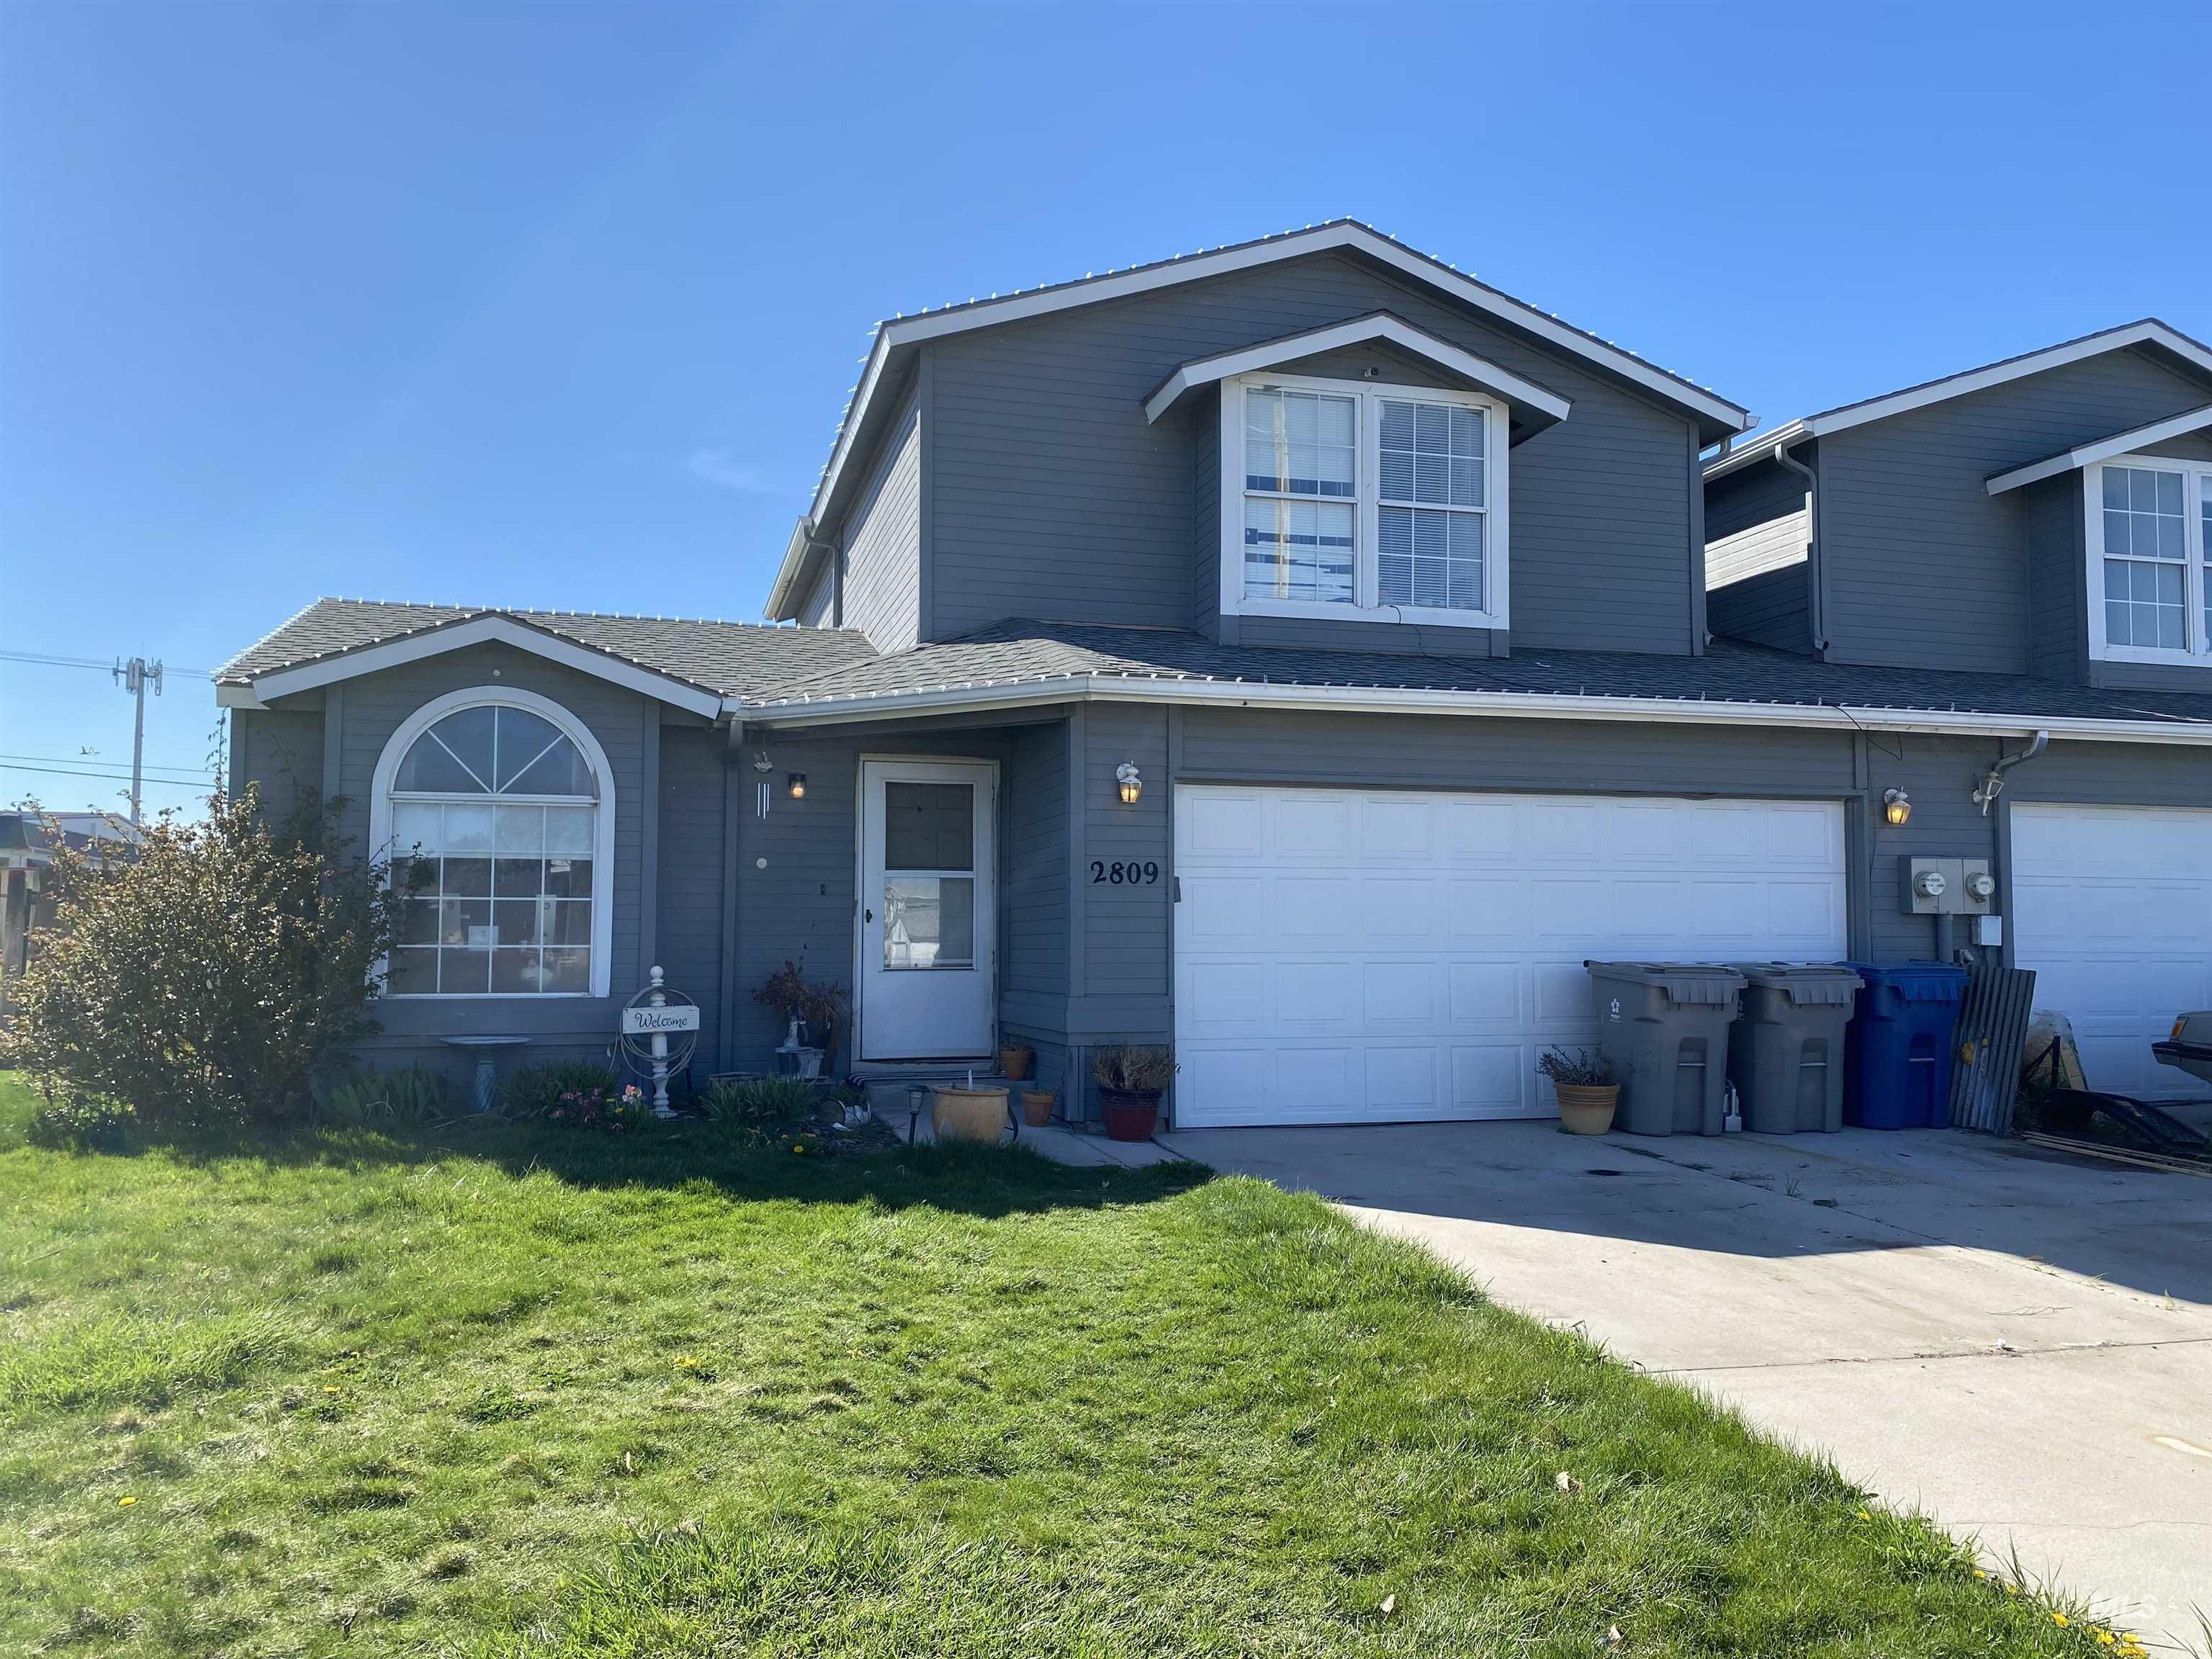 2809 Laurel Way, Nampa, Idaho 83686, 3 Bedrooms, 2.5 Bathrooms, Residential Income For Sale, Price $337,500,MLS 98906693